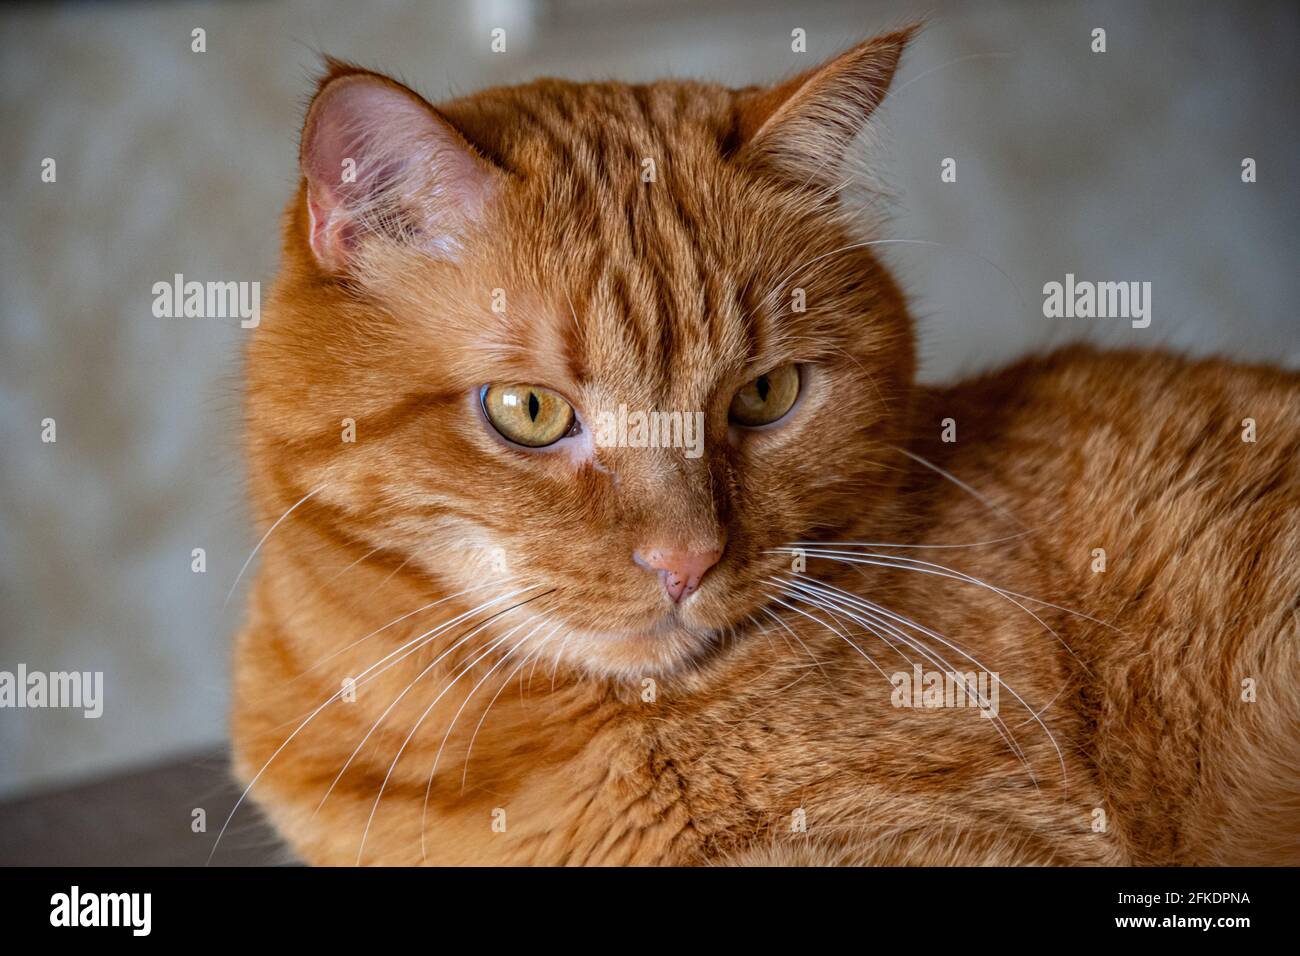 Ginger tabby cat with tiger-like stripes on head. Red cat looking side and posing proudly. Young cat head with ginger eyes and long white whiskers Stock Photo